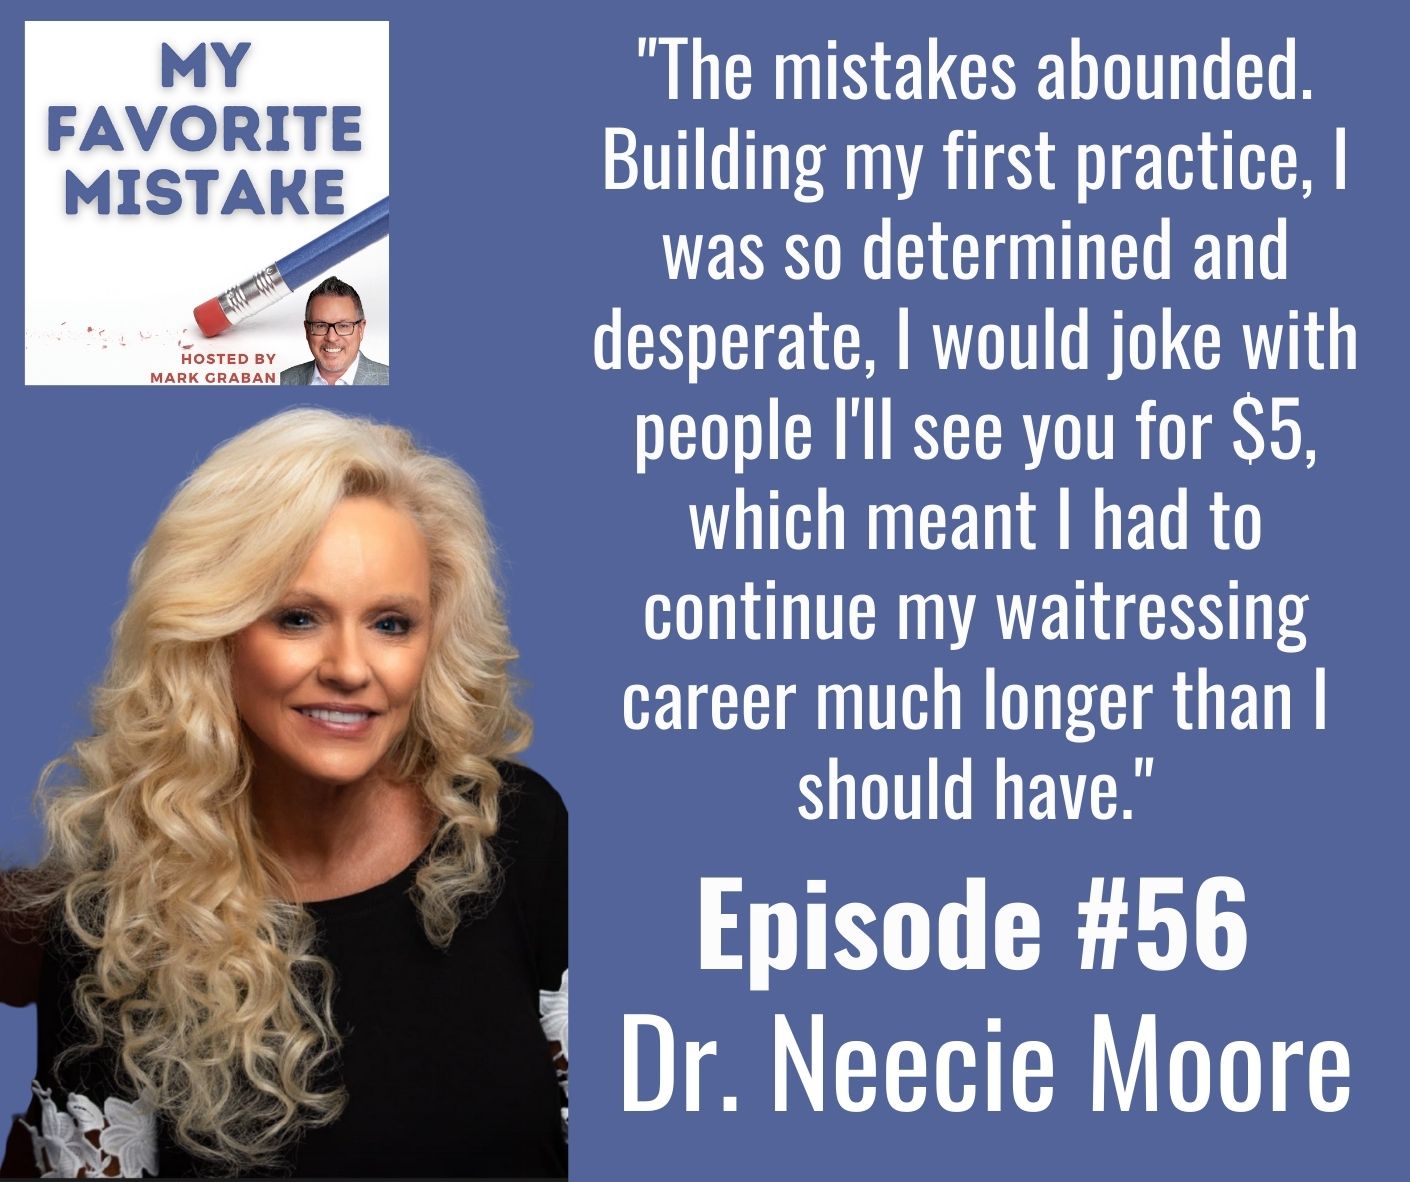 "The mistakes abounded. Building my first practice, I was so determined and desperate, I would joke with people I'll see you for $5, which meant I had to continue my waitressing career much longer than I should have."